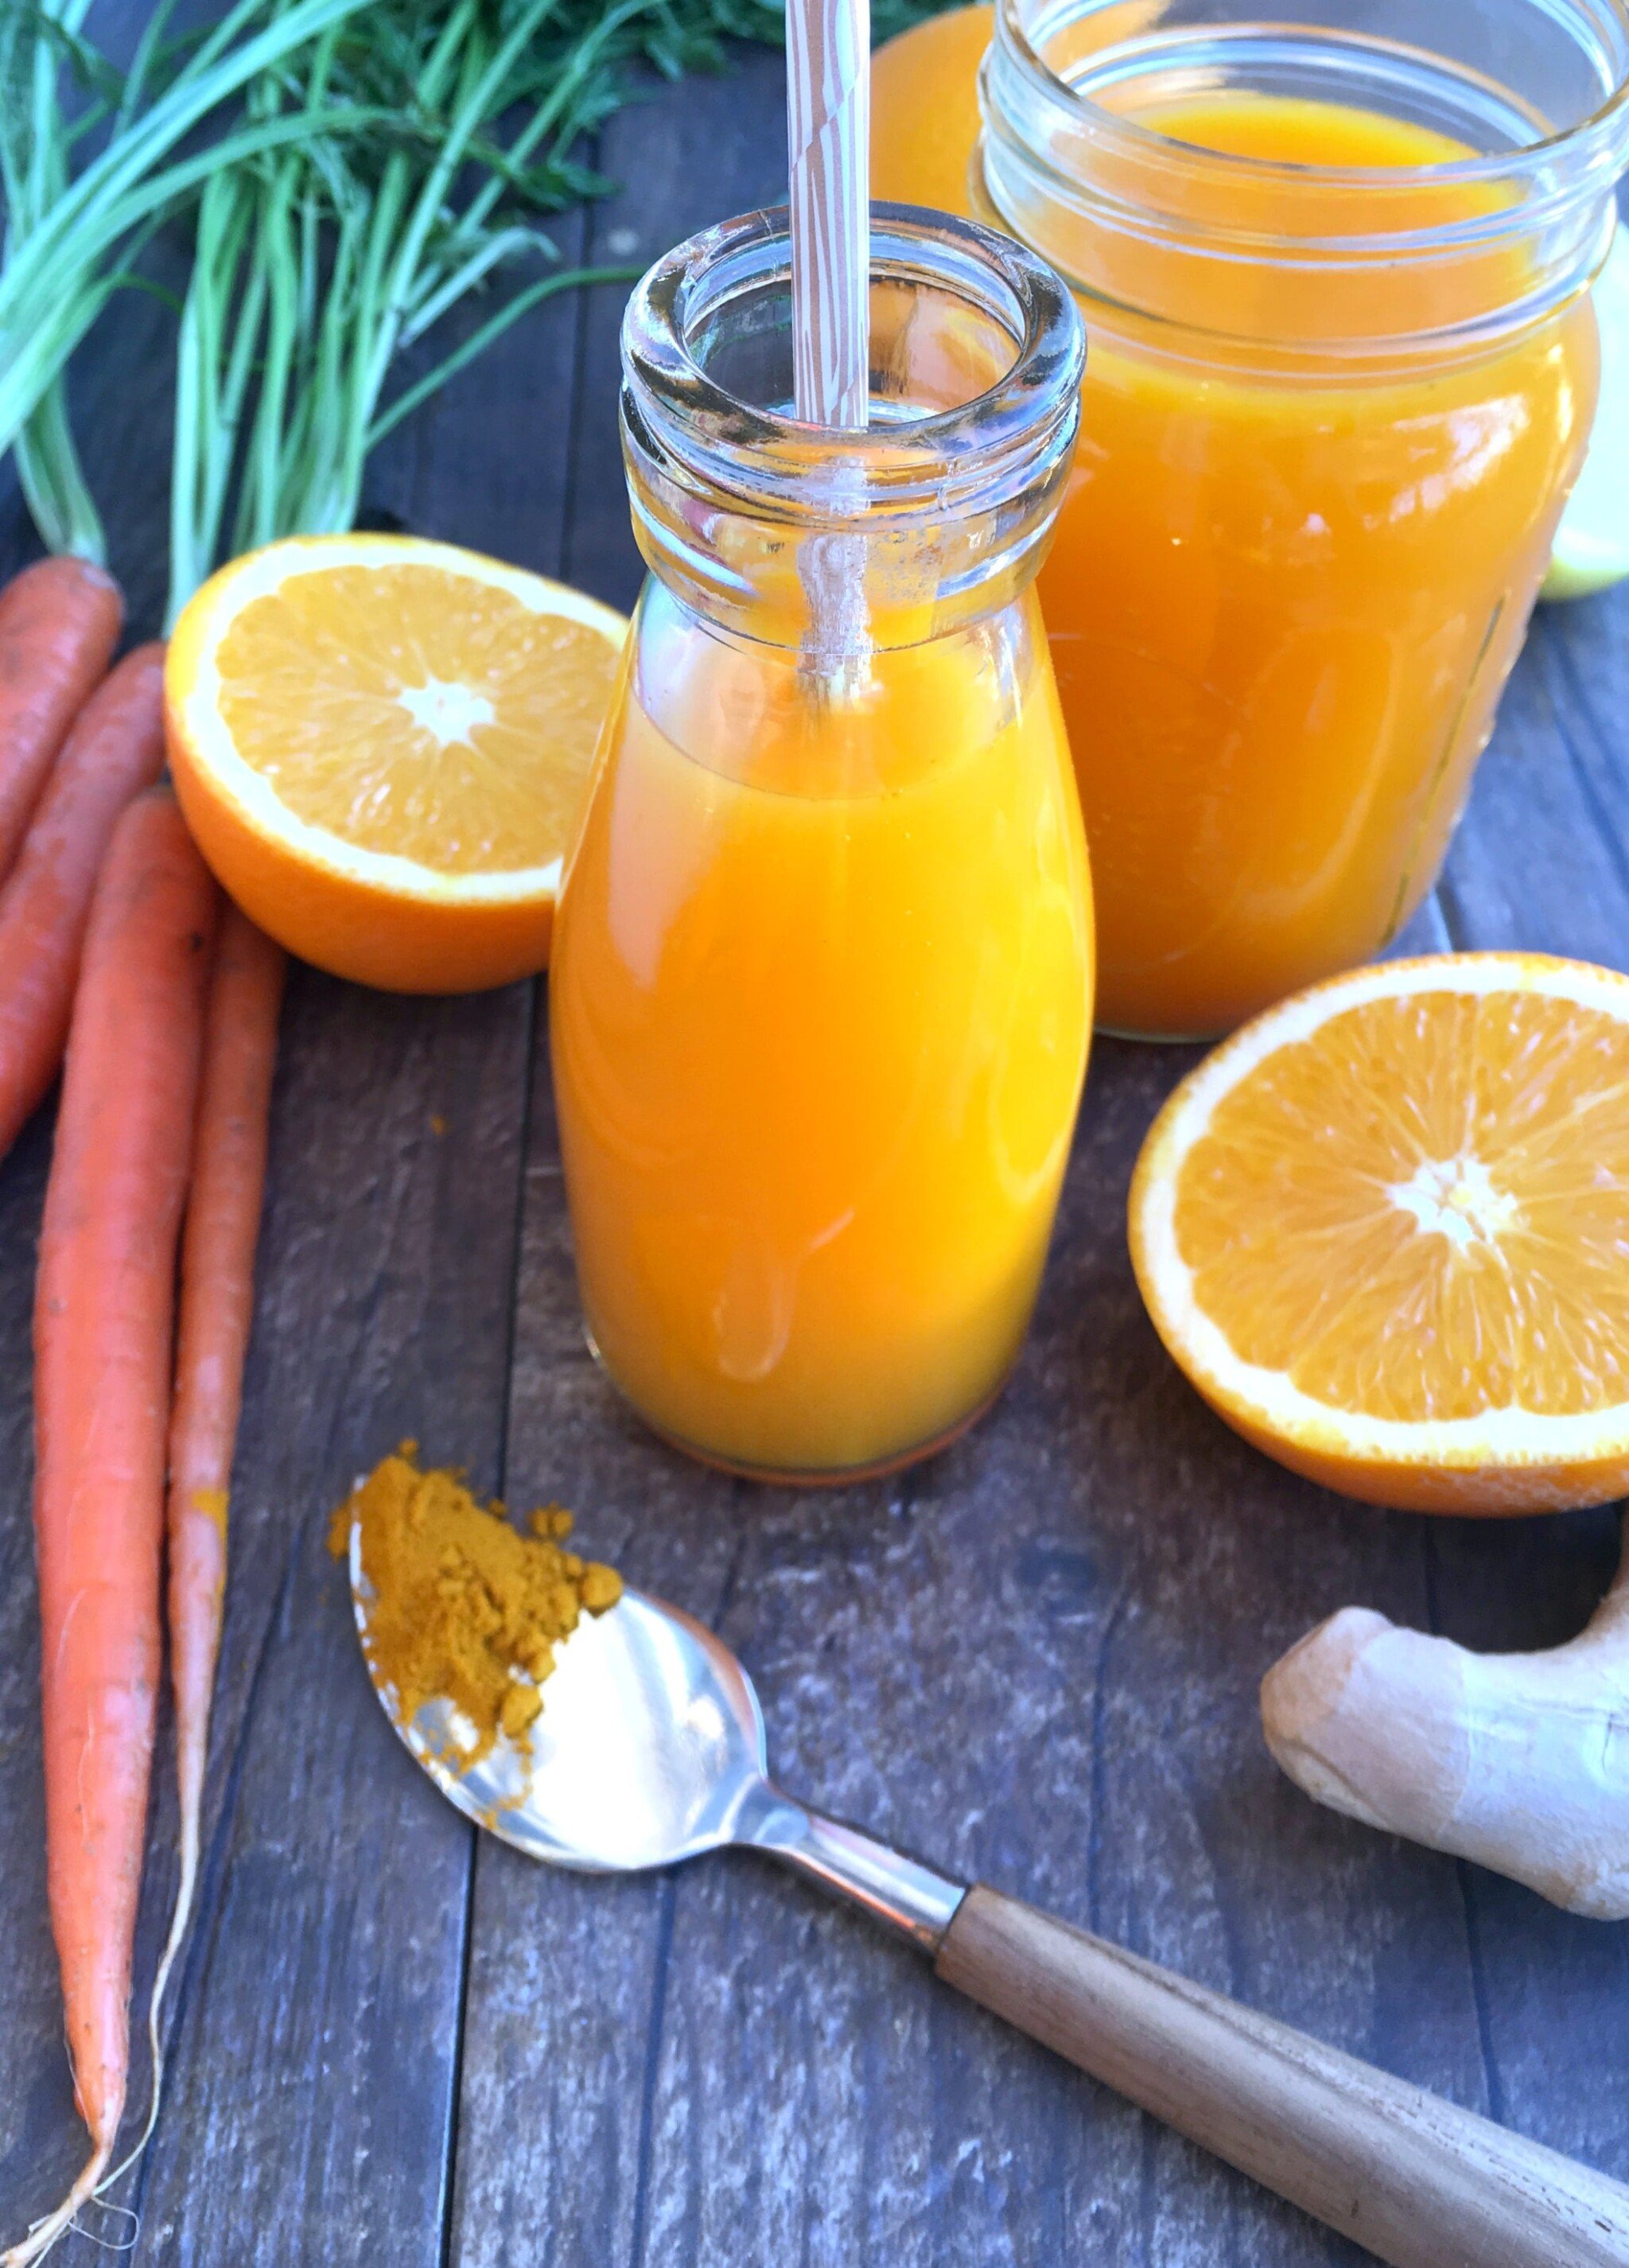 Feeling a little under the weather? This refreshing juice can give your immune system a boost and help you fight diseases and inflammation.